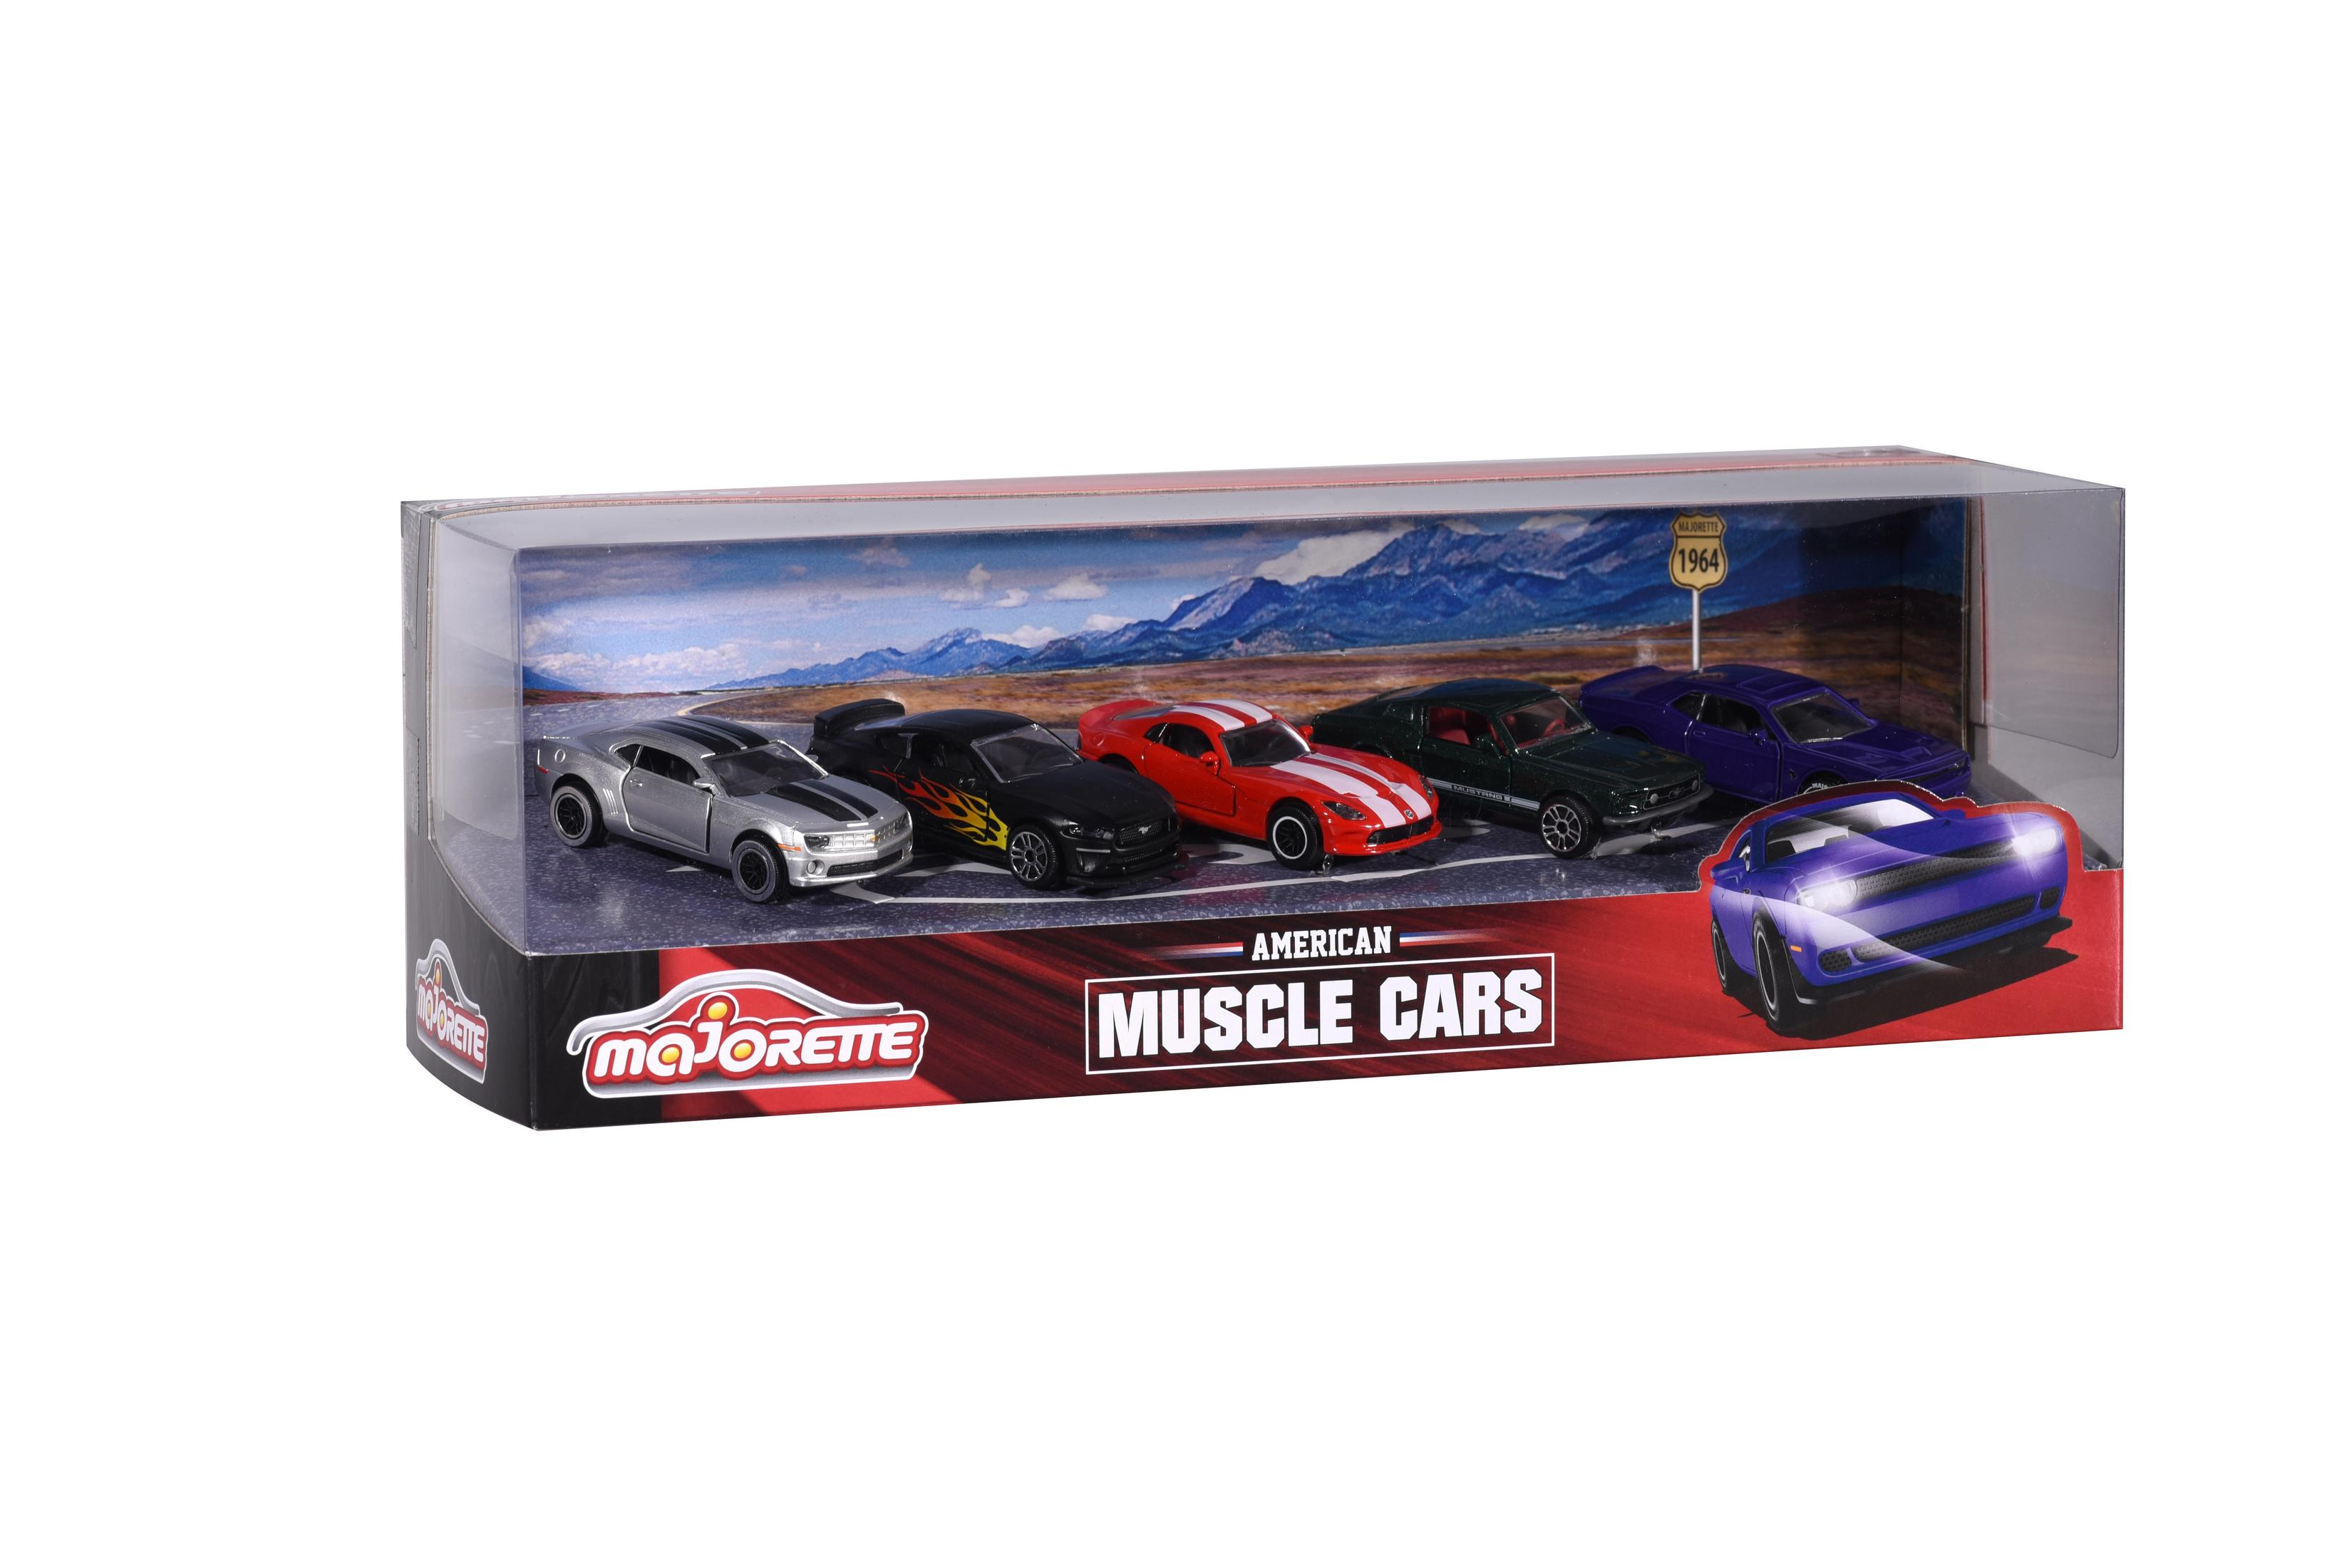 GIFTPACK PCS 212053168 MUSCLE Spielzeugauto 5 MAJORETTE Mehrfarbig CARS